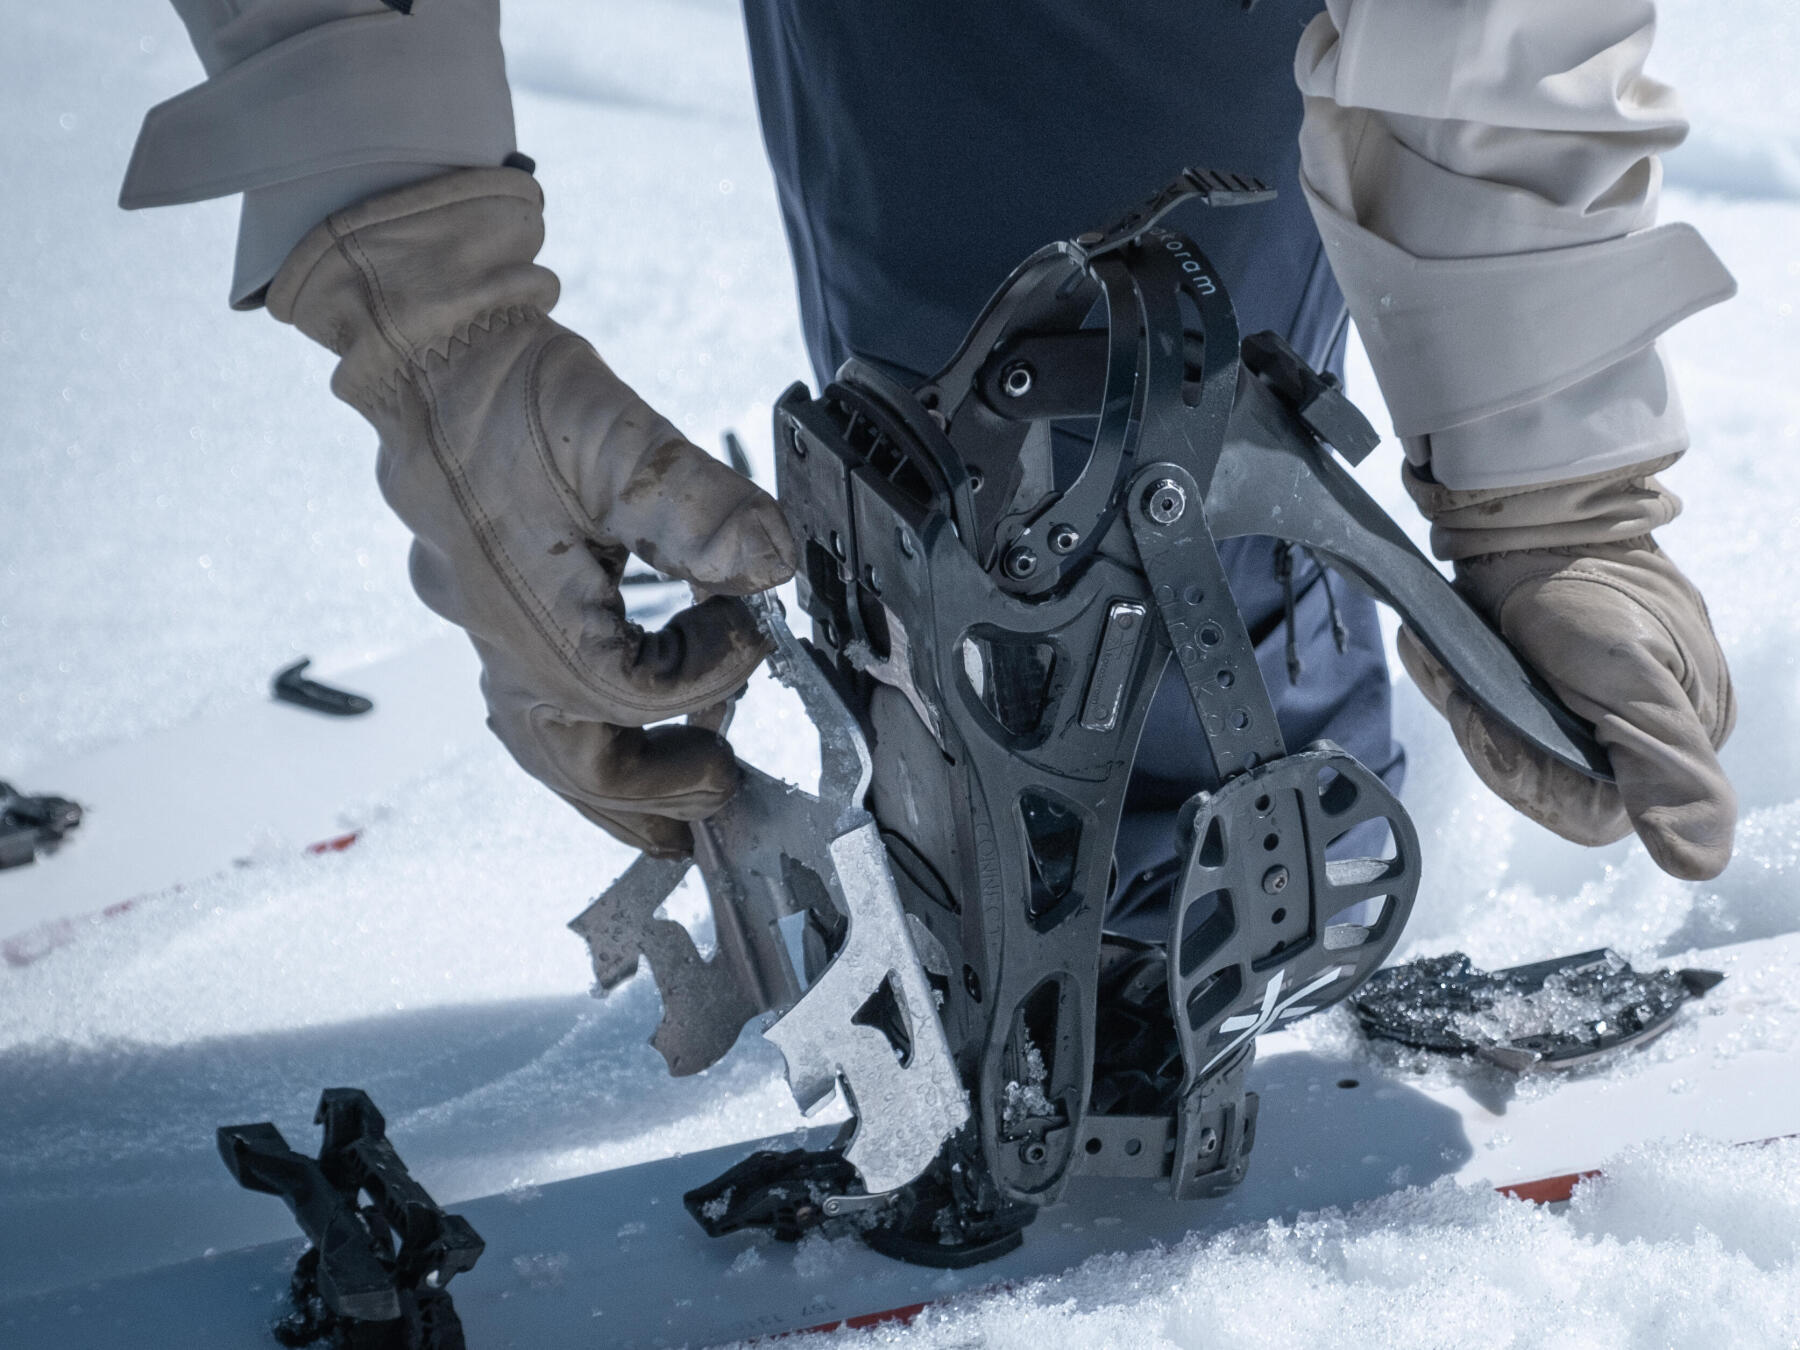 HOW DO YOU USE SPLITBOARD CRAMPONS?